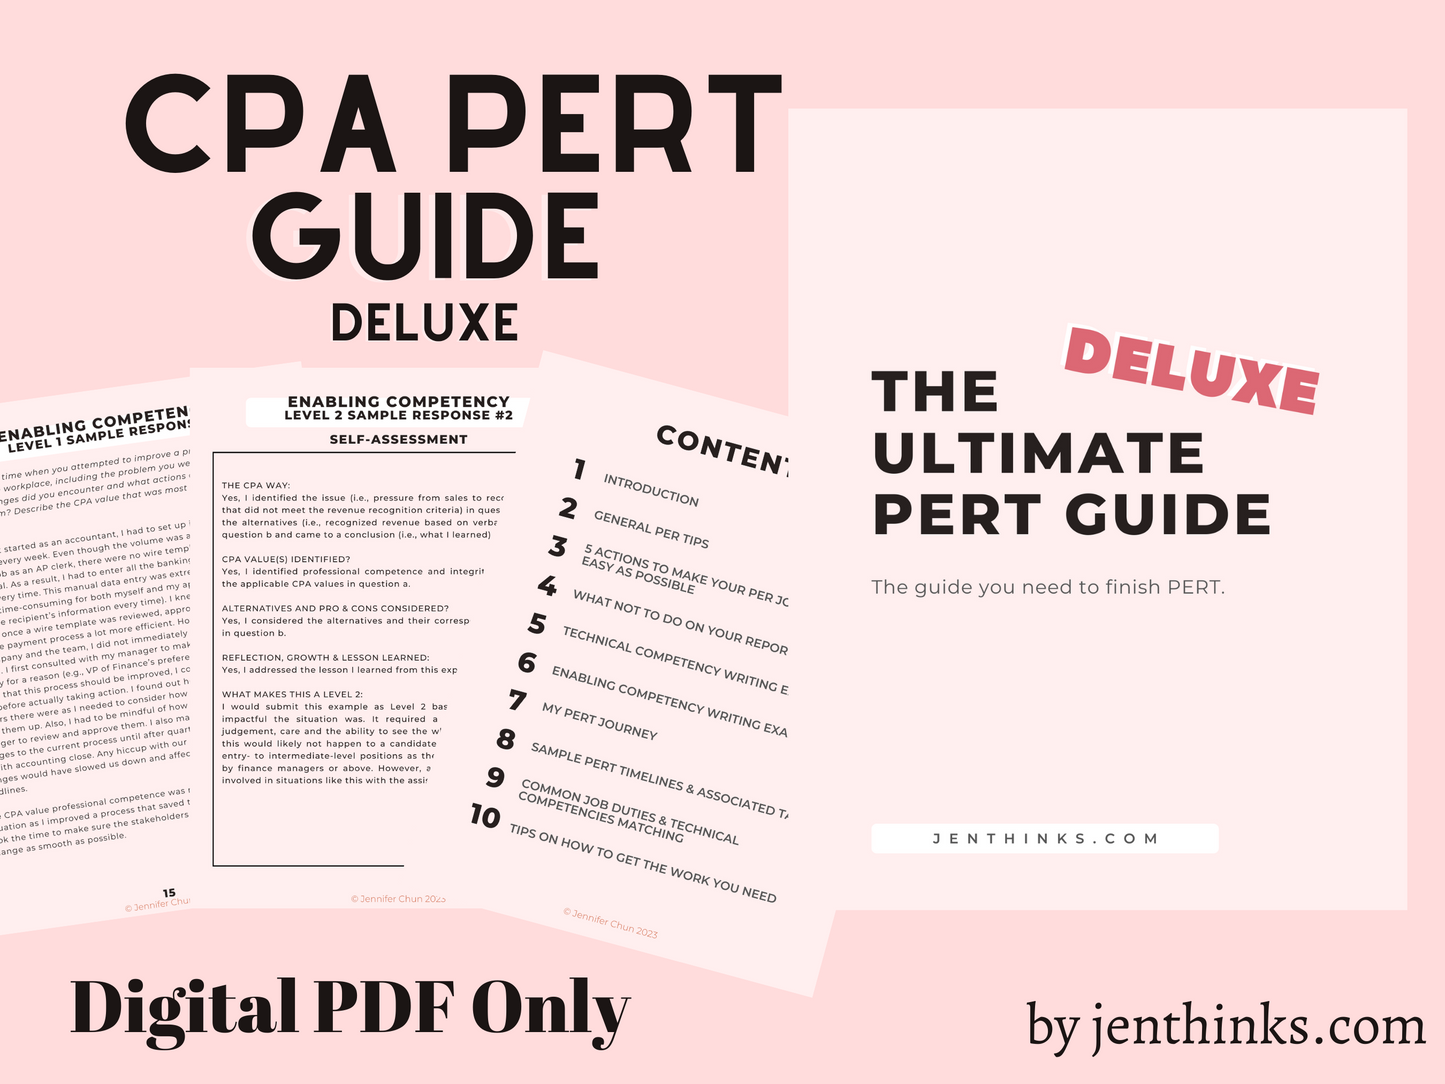 The CPA PERT Guide by jenthinks (Deluxe)